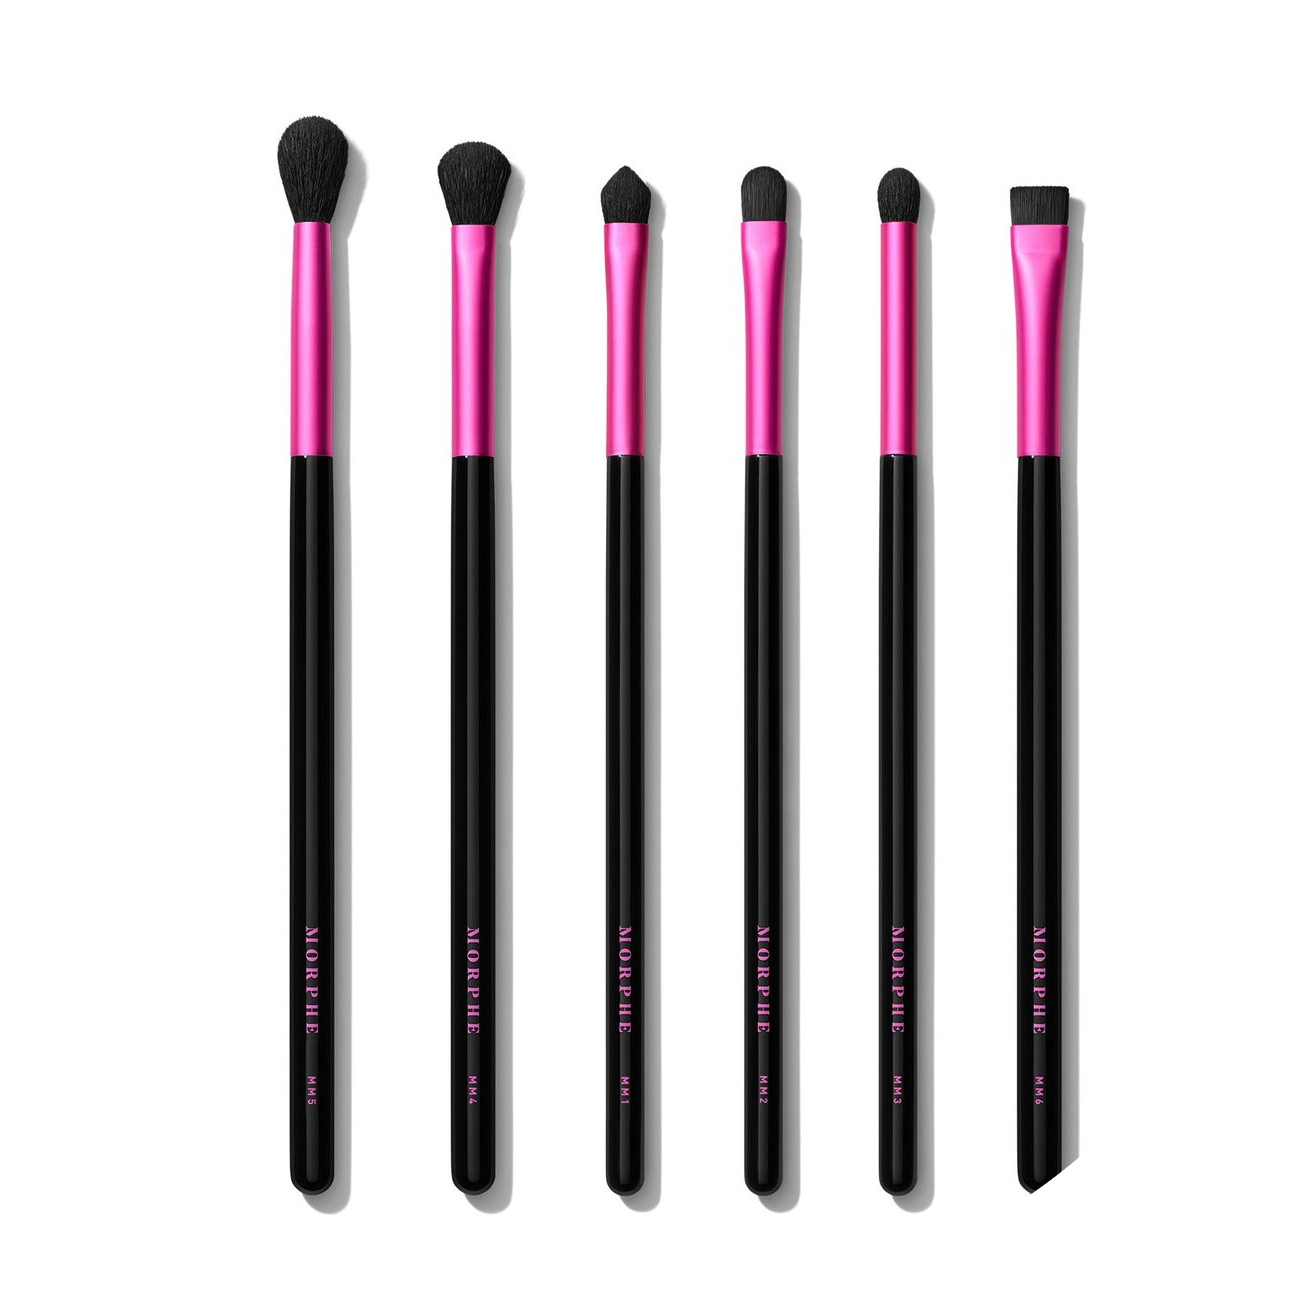 MICKEY & FRIENDS TRUTH BE BOLD 6-PIECE BRUSH SET NudeFace Chile